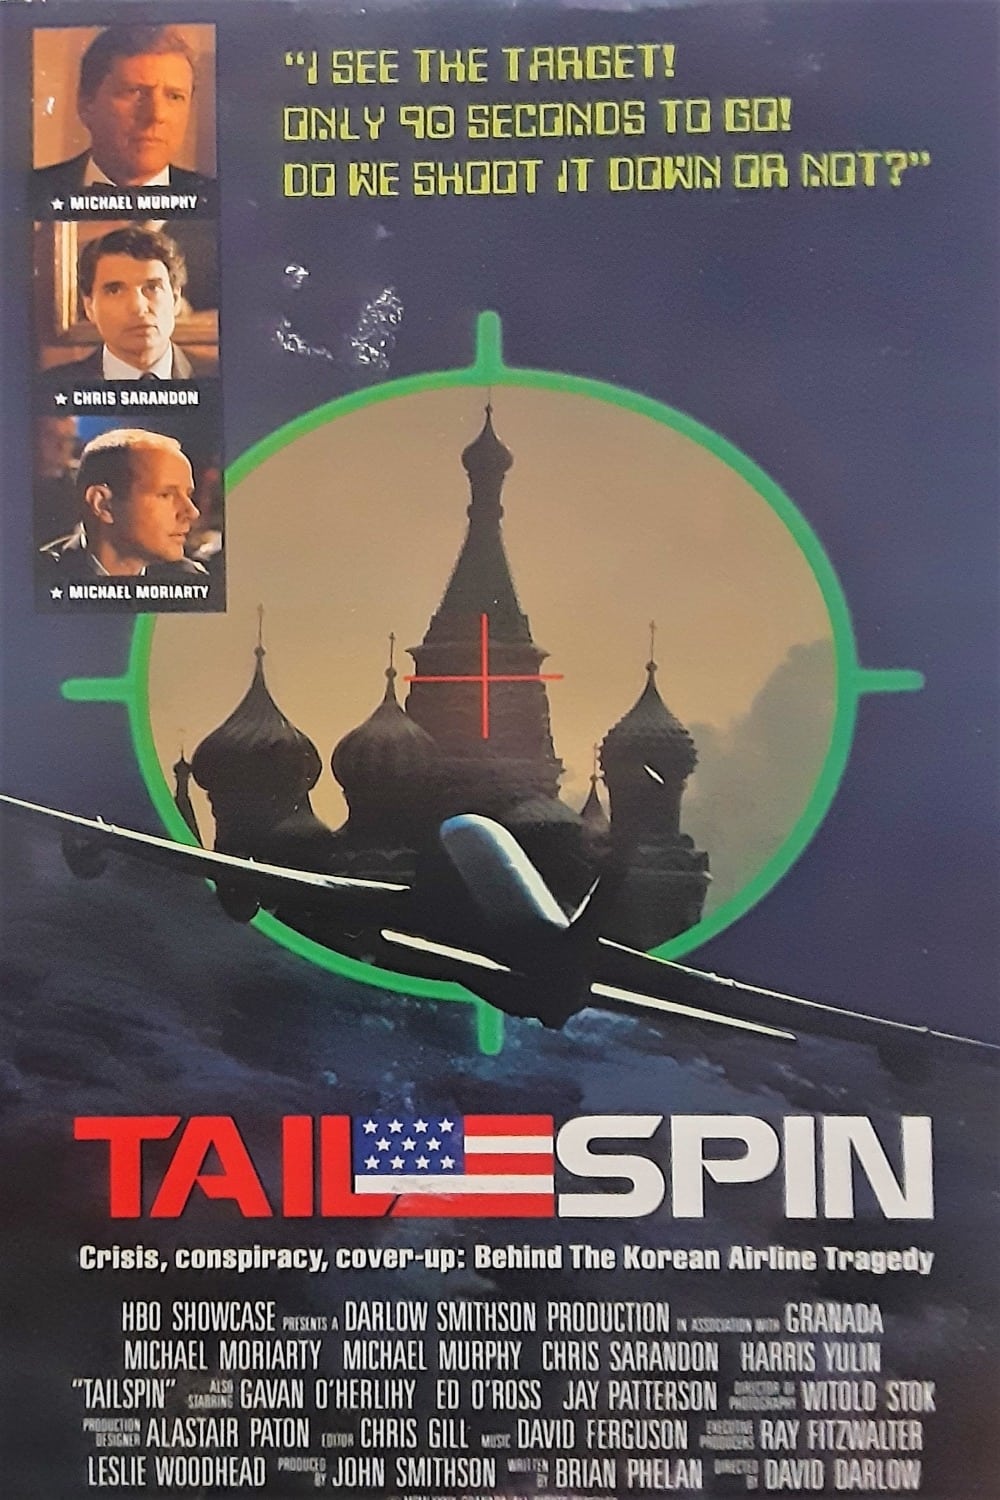 Tailspin: Behind the Korean Airliner Tragedy (1989)